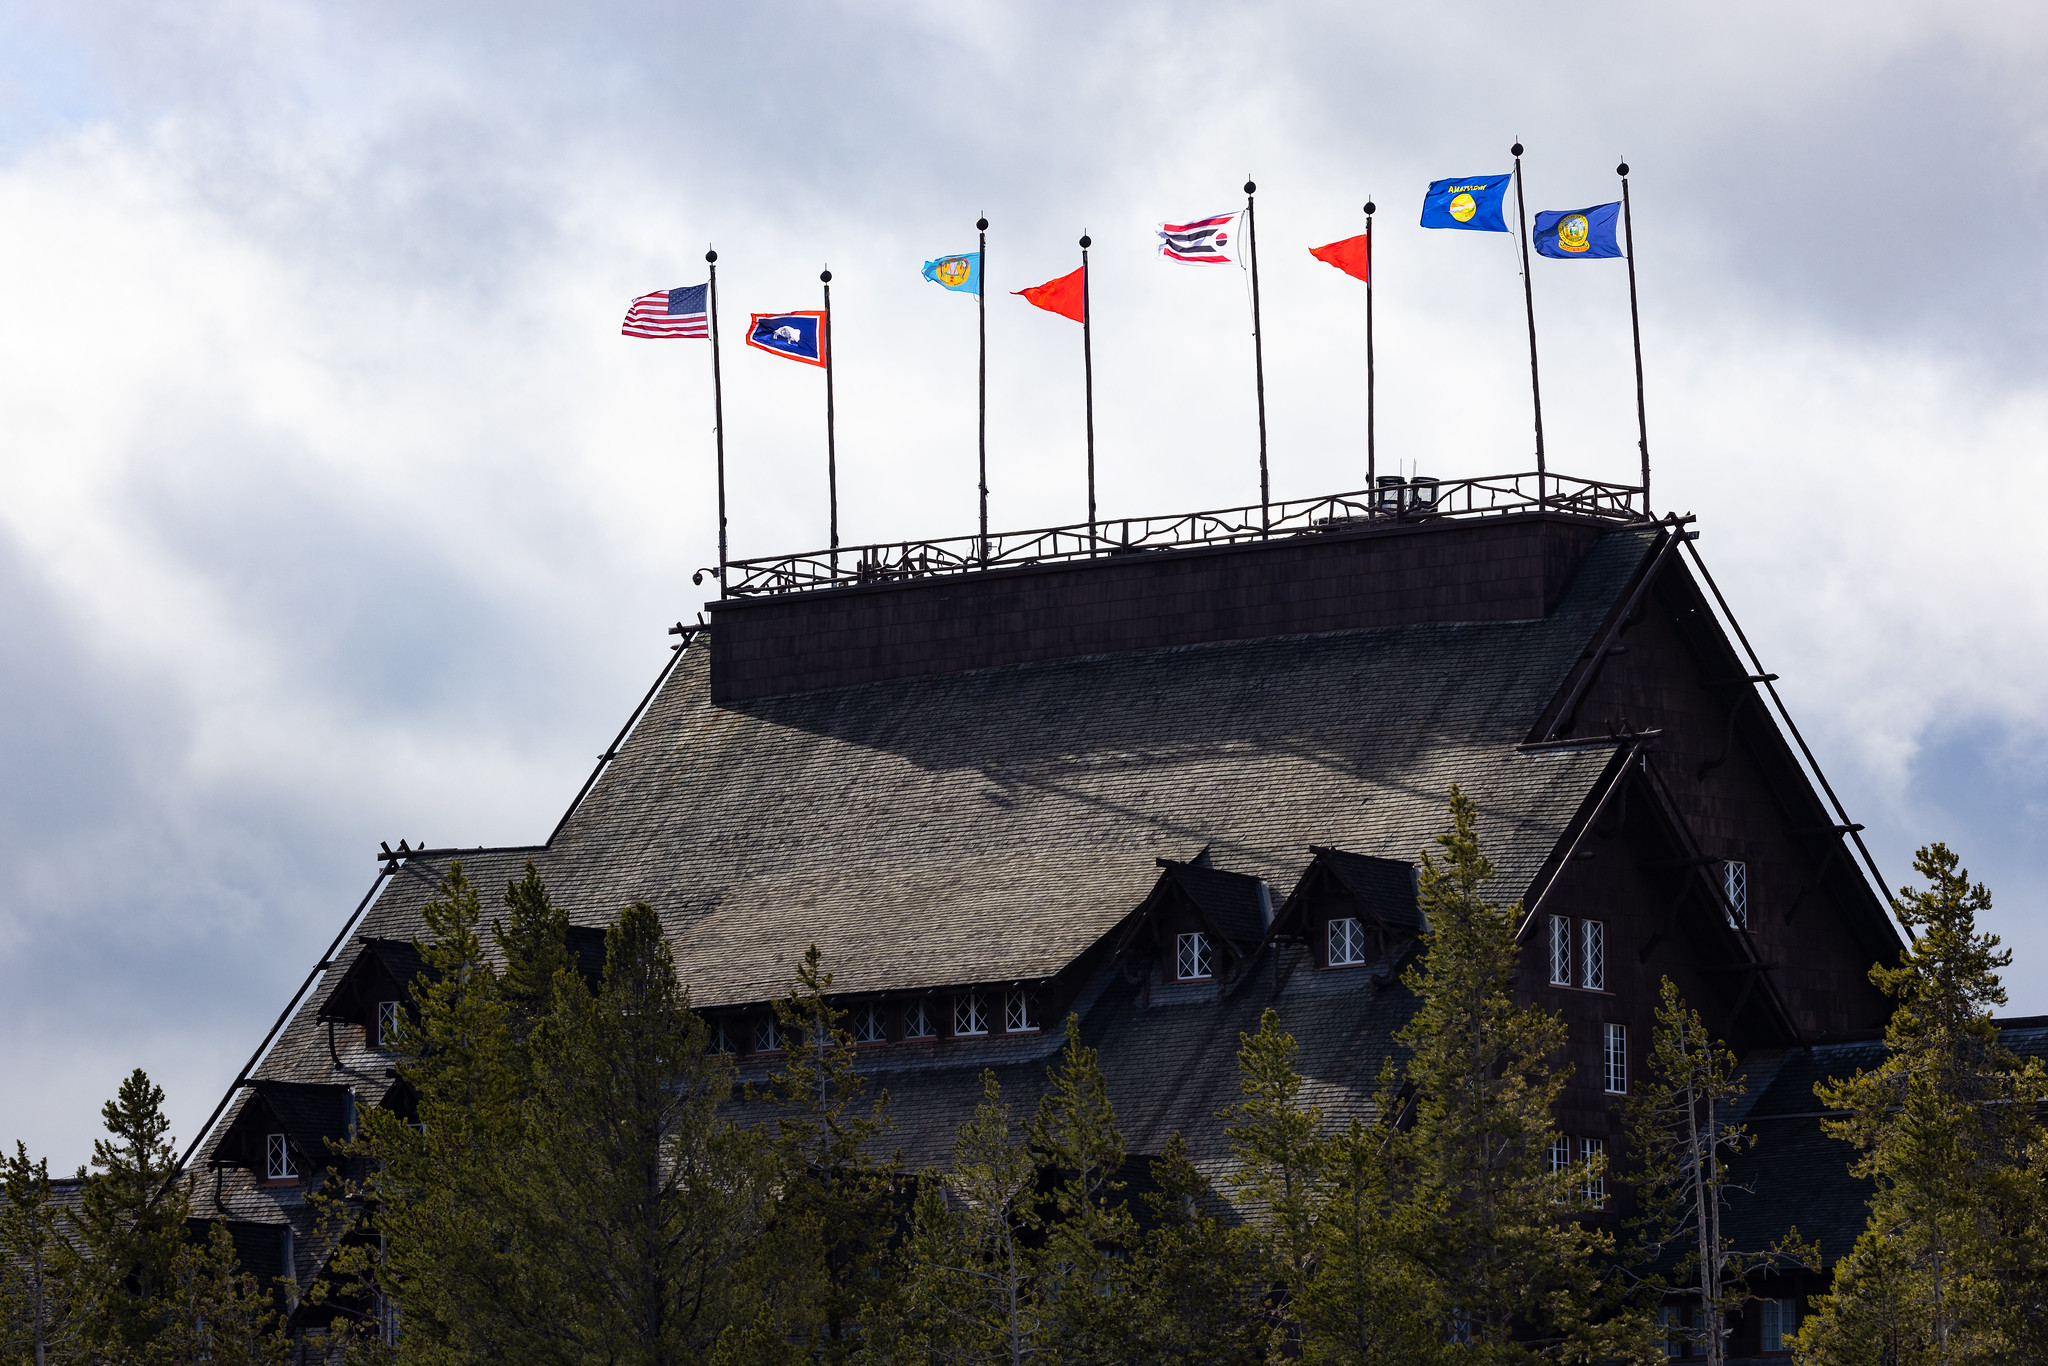 Yellowstone National Park Lodges 150 Years of Inspiration Event: Tribal, State, and US flags fly atop the Old Faithful Inn